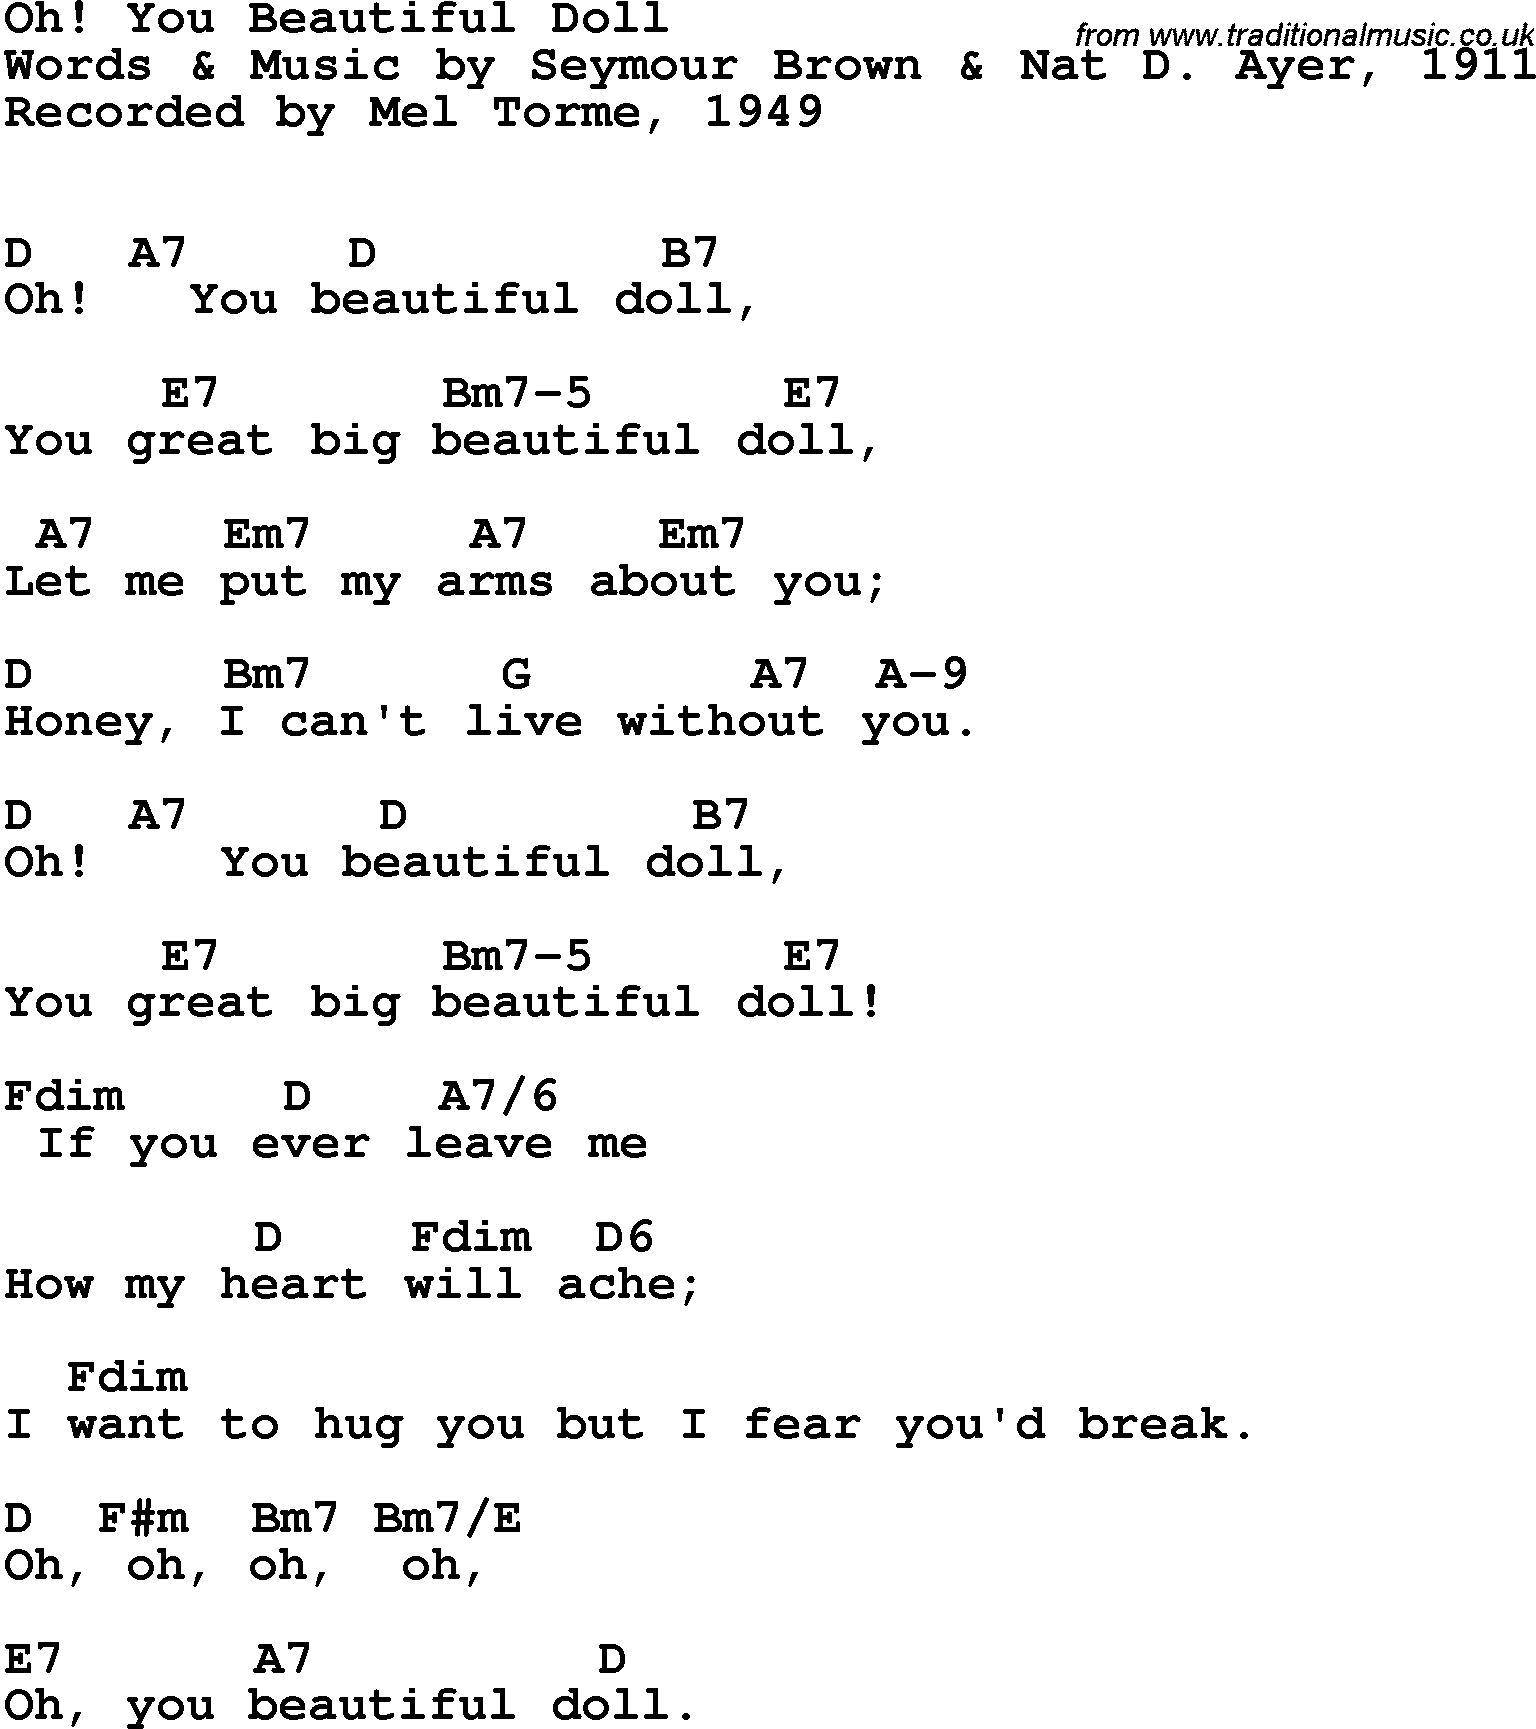 Wagon Wheel Chords Song Lyrics With Guitar Chords For Oh You Beautiful Doll Mel